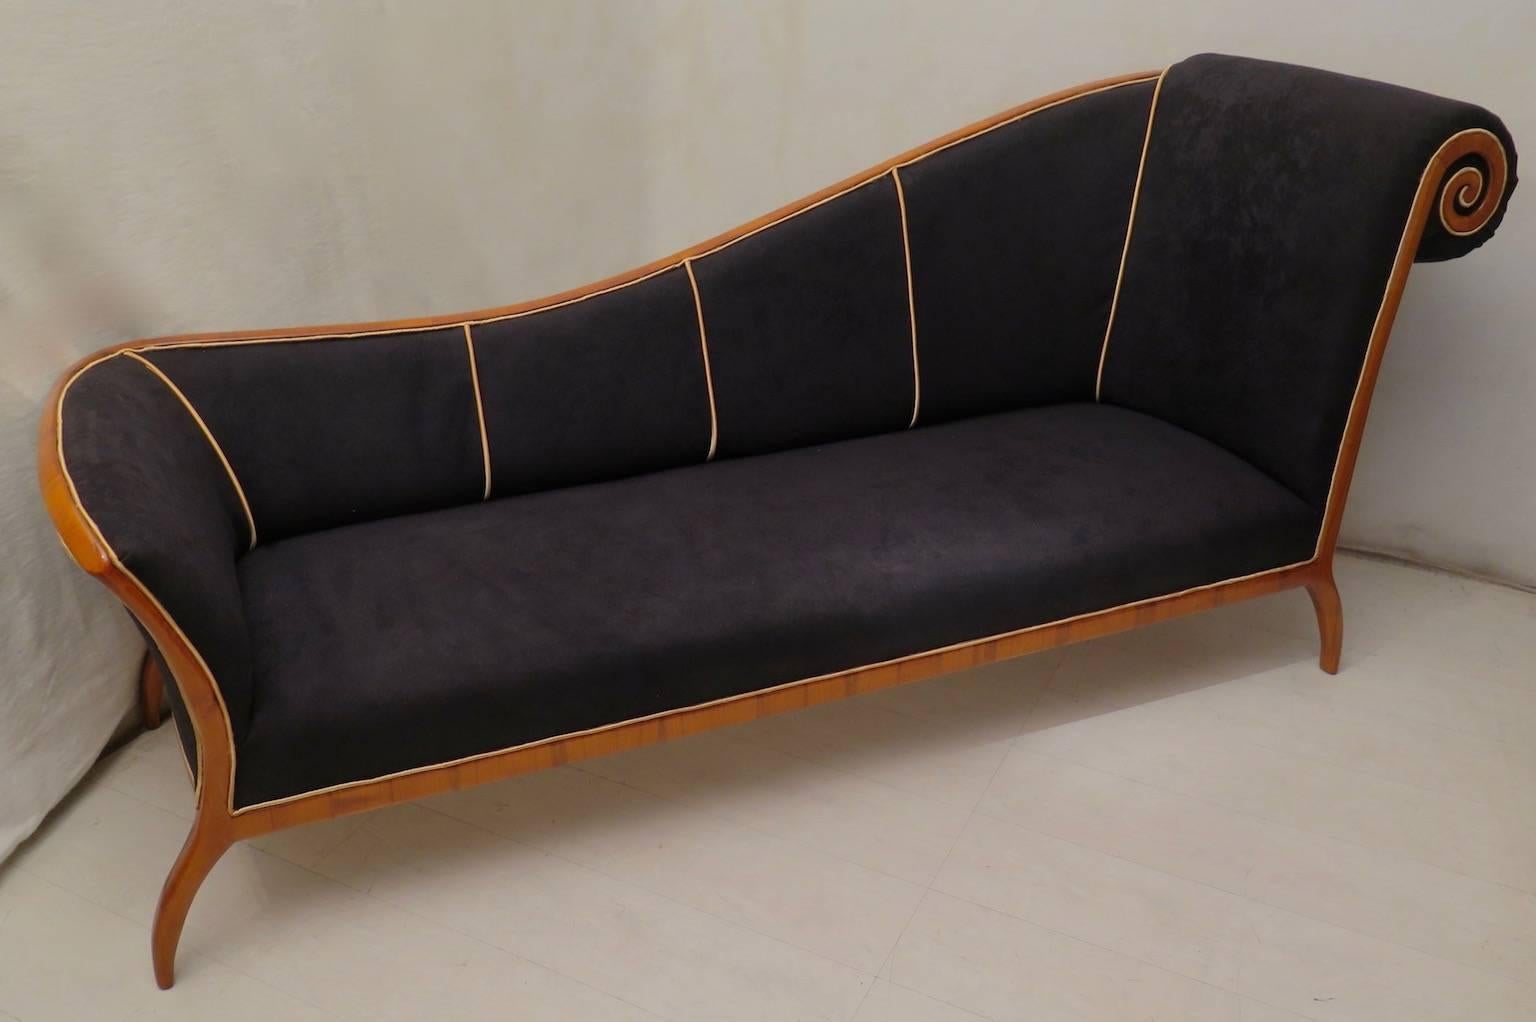 Sofa upholstered in black velvet, with gold border. Dormeuse formed by a large base seat, with a backrest that slopes from right to left, and a spiral armrest.

The four very fine legs that continue to give movement to the whole Dormeuse. There are